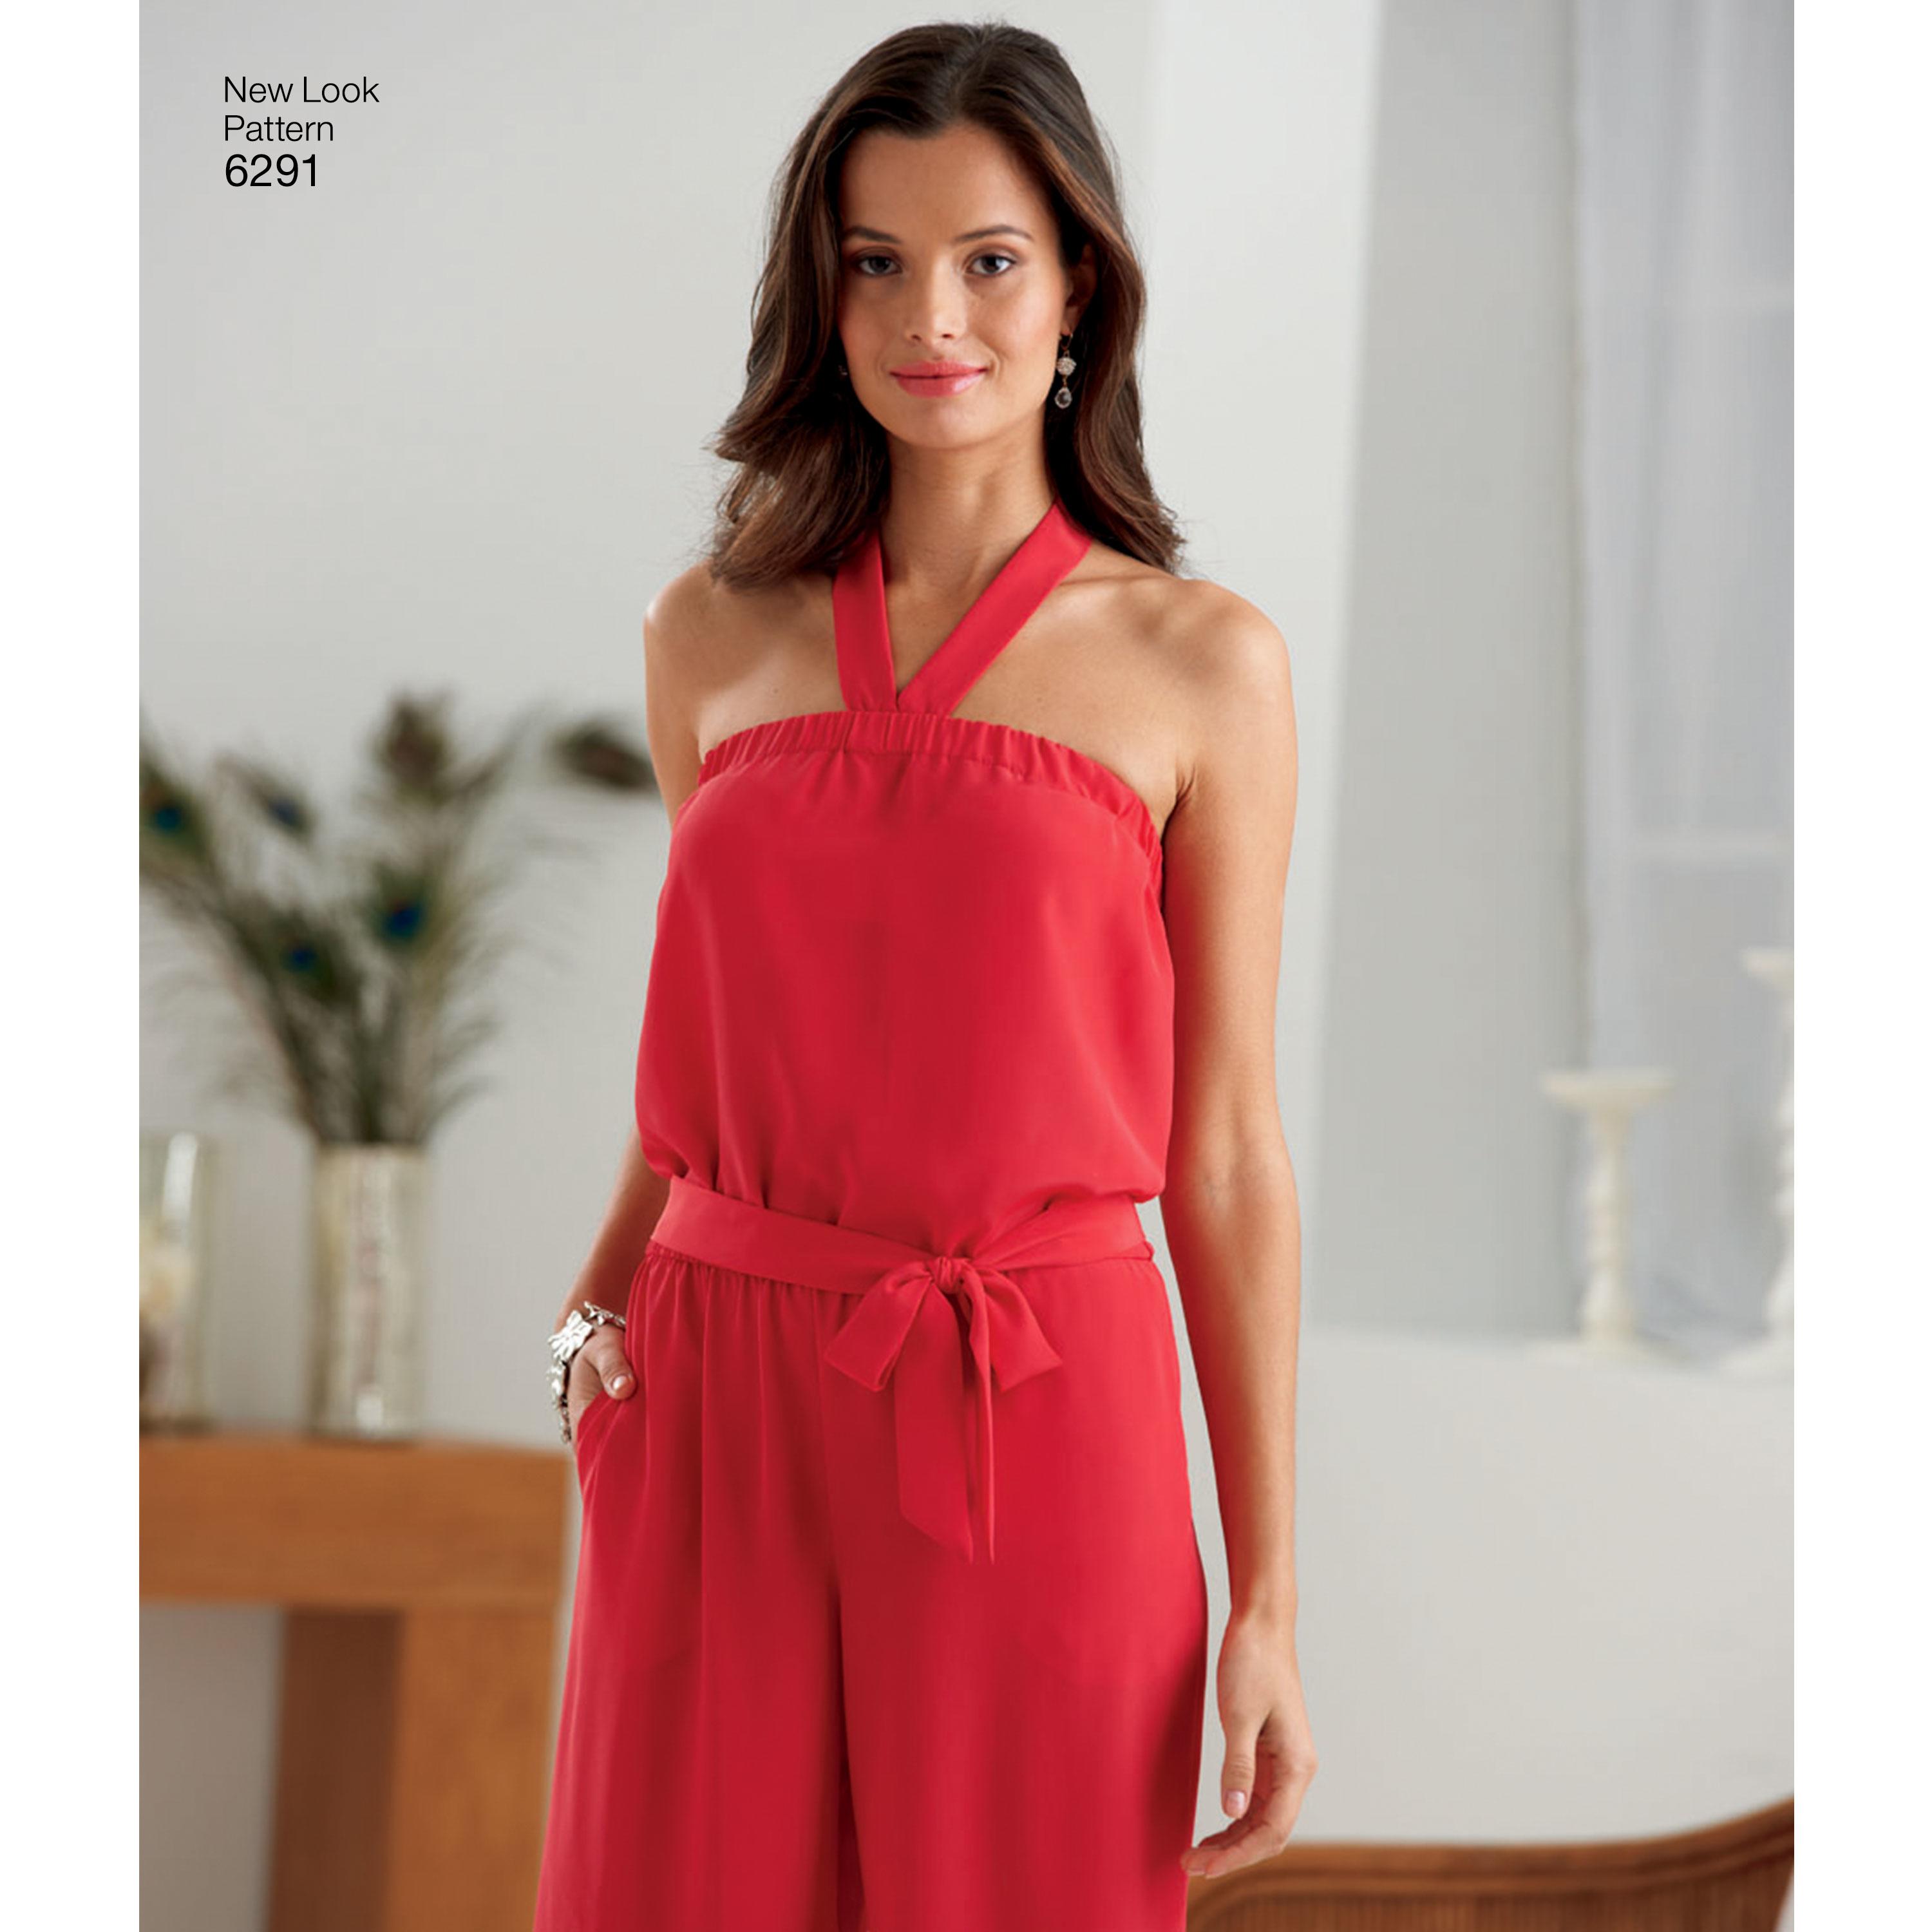 NewLook N6291 Misses' Jumpsuit & Dress Each in Two Lengths